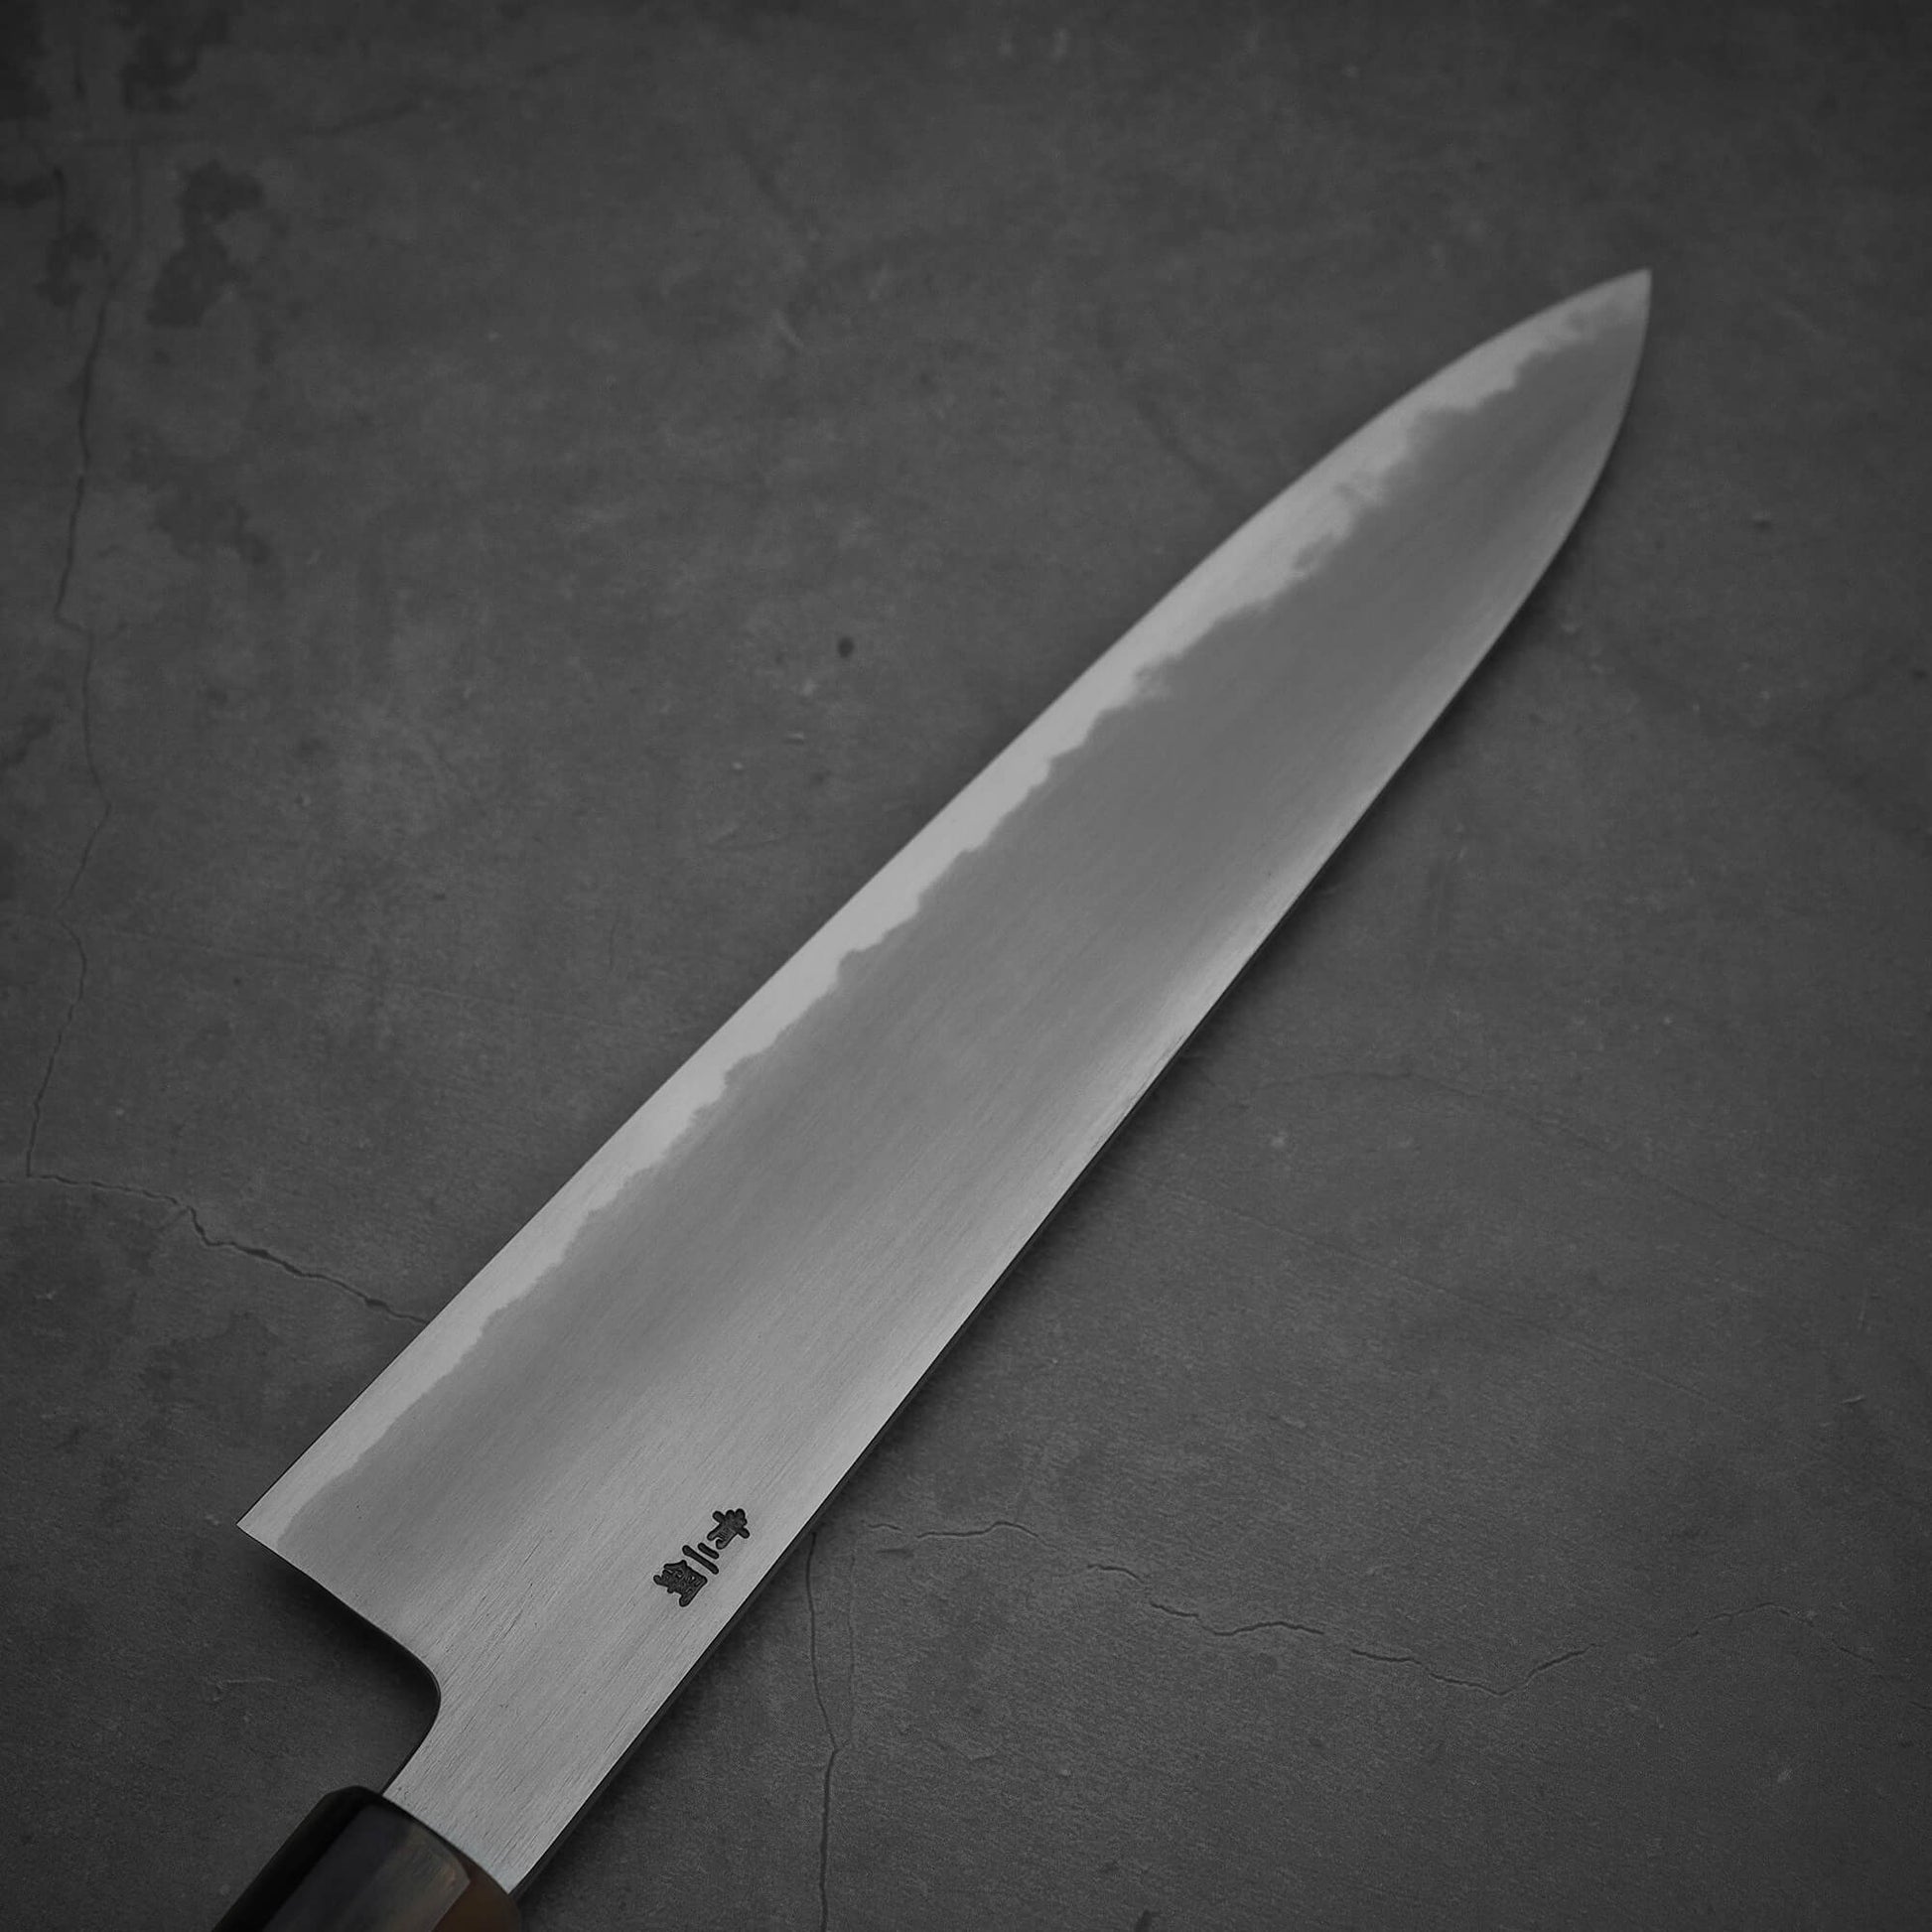 Top view of the blade of Nakagawa aogami#2 gyuto. Image shows the left side.